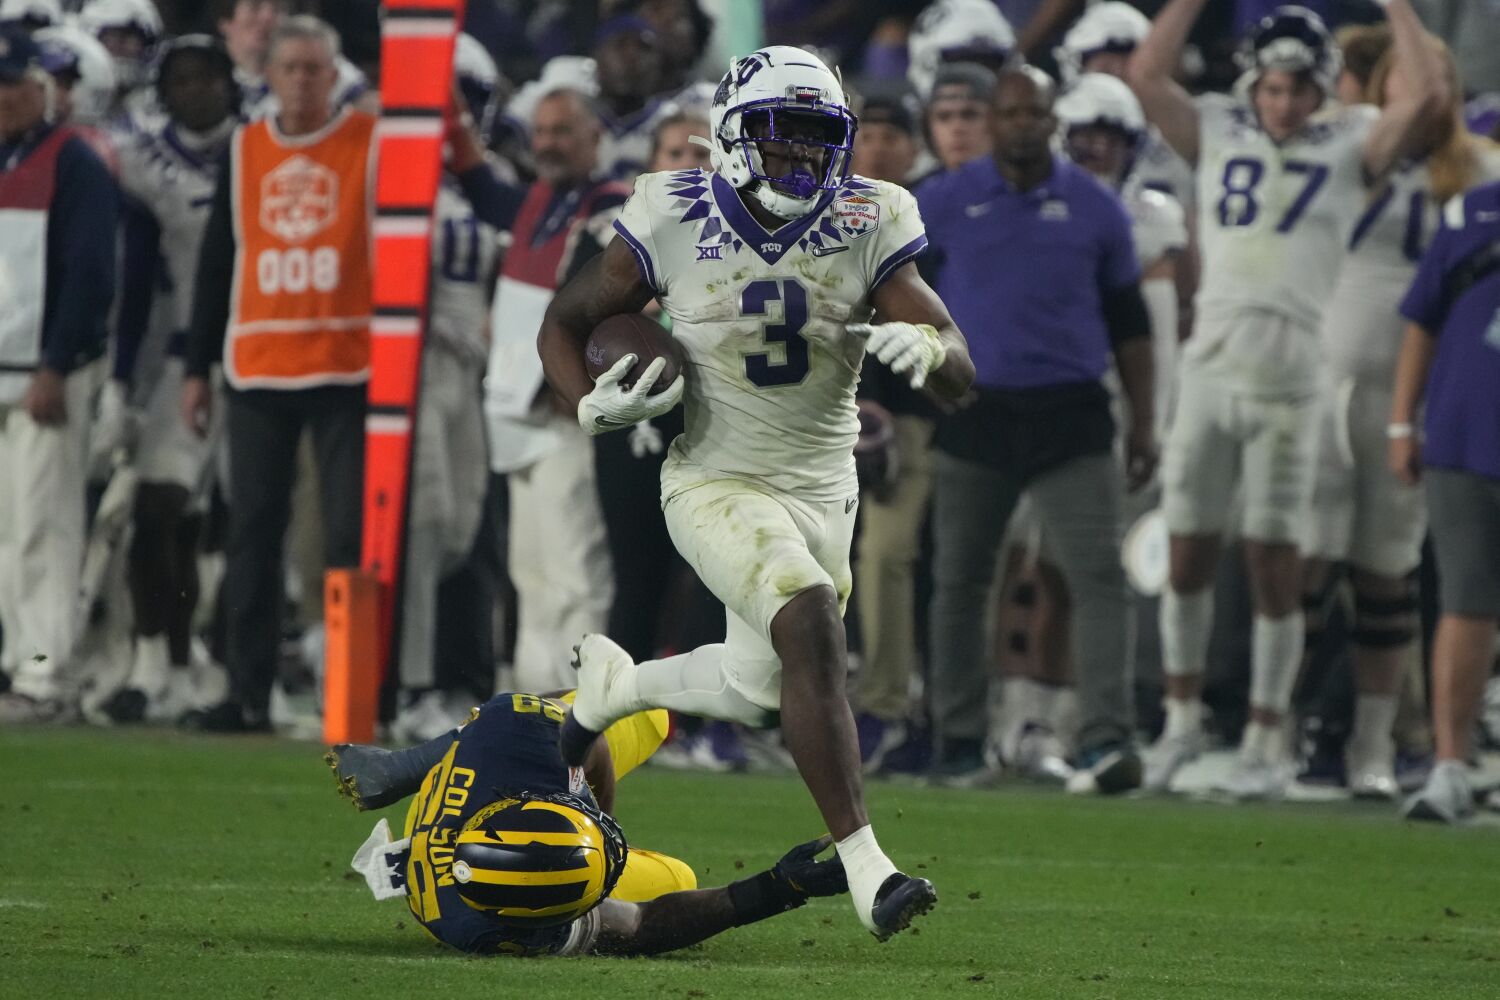 TCU's Emari Demercado will finally pay back sacrifices by playing in CFP title game